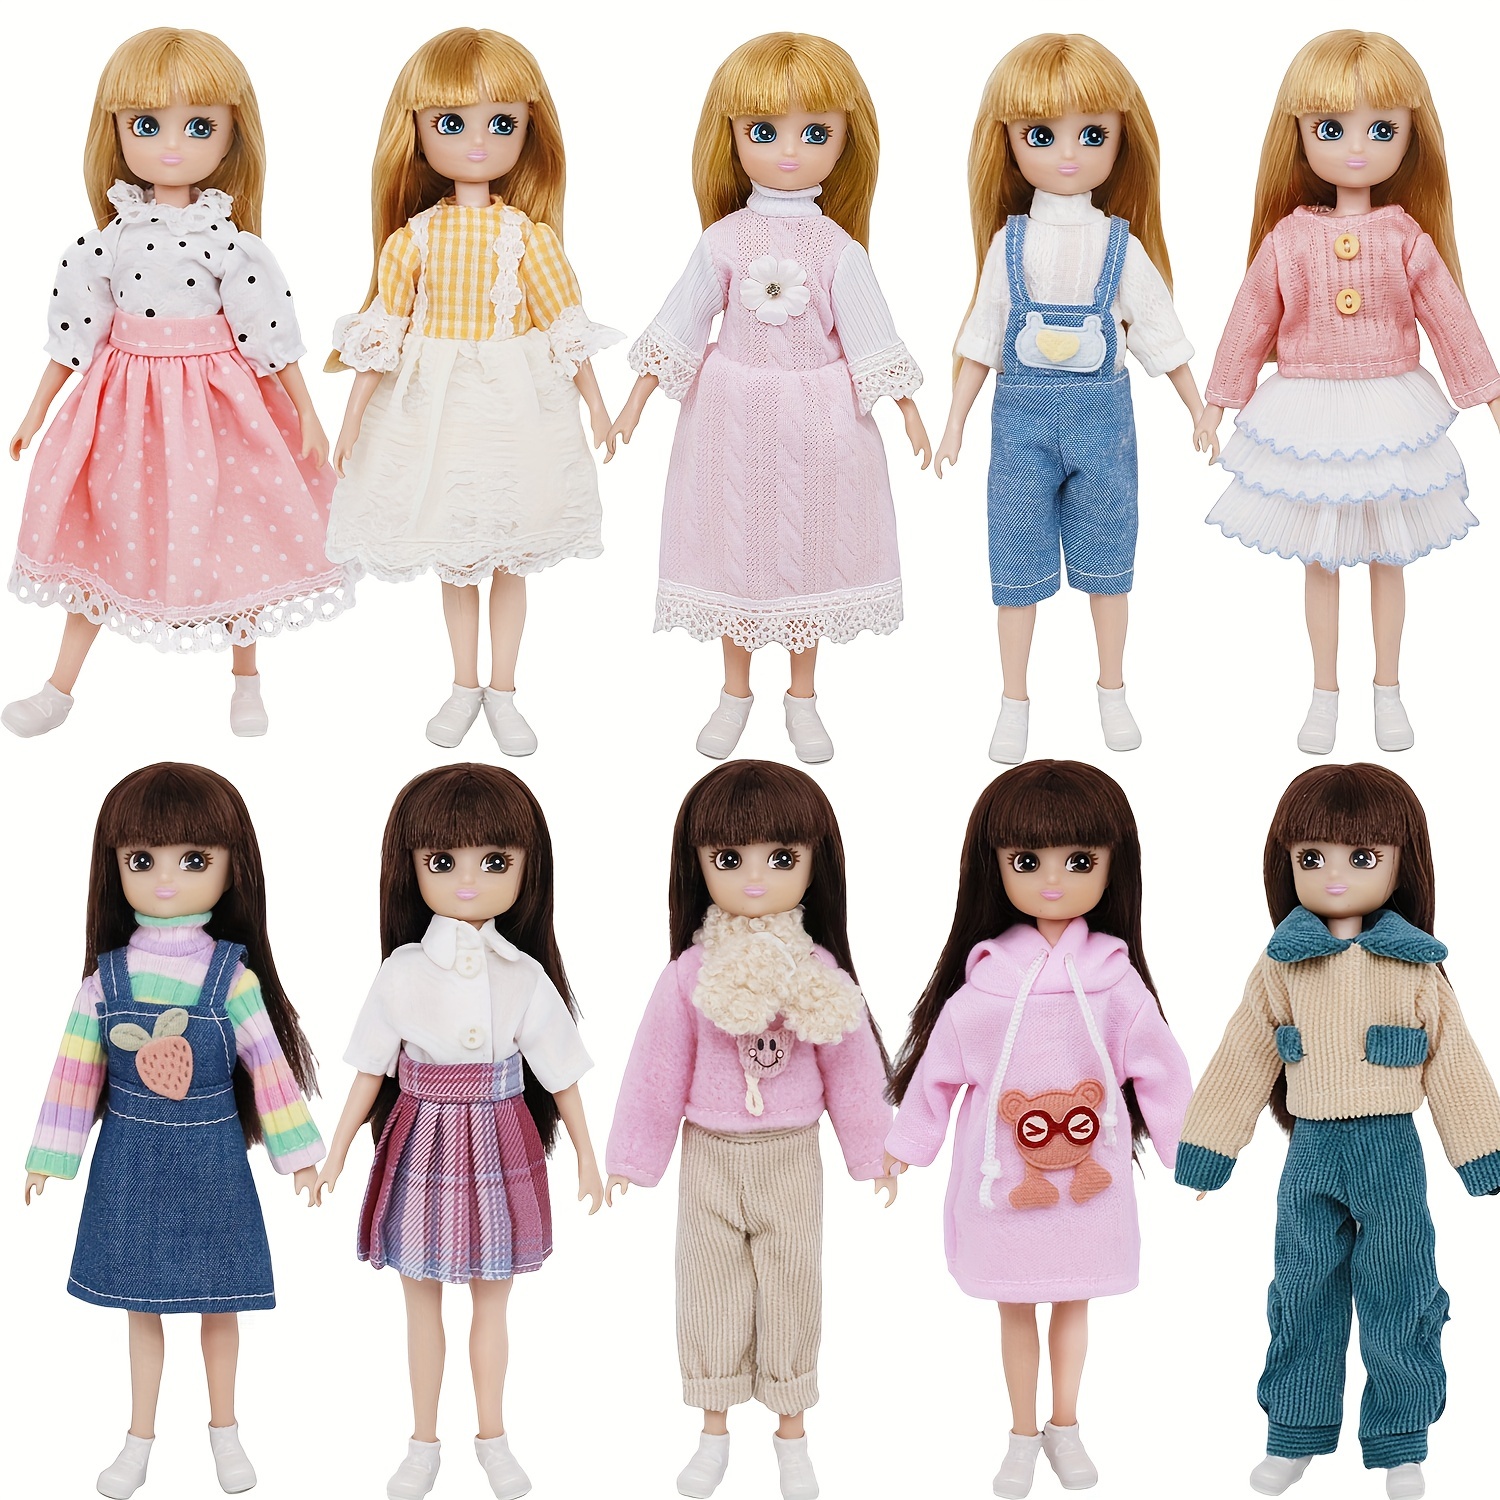 Mini Doll Clothes Dress Outfits Dolls Dress Accessories Toys